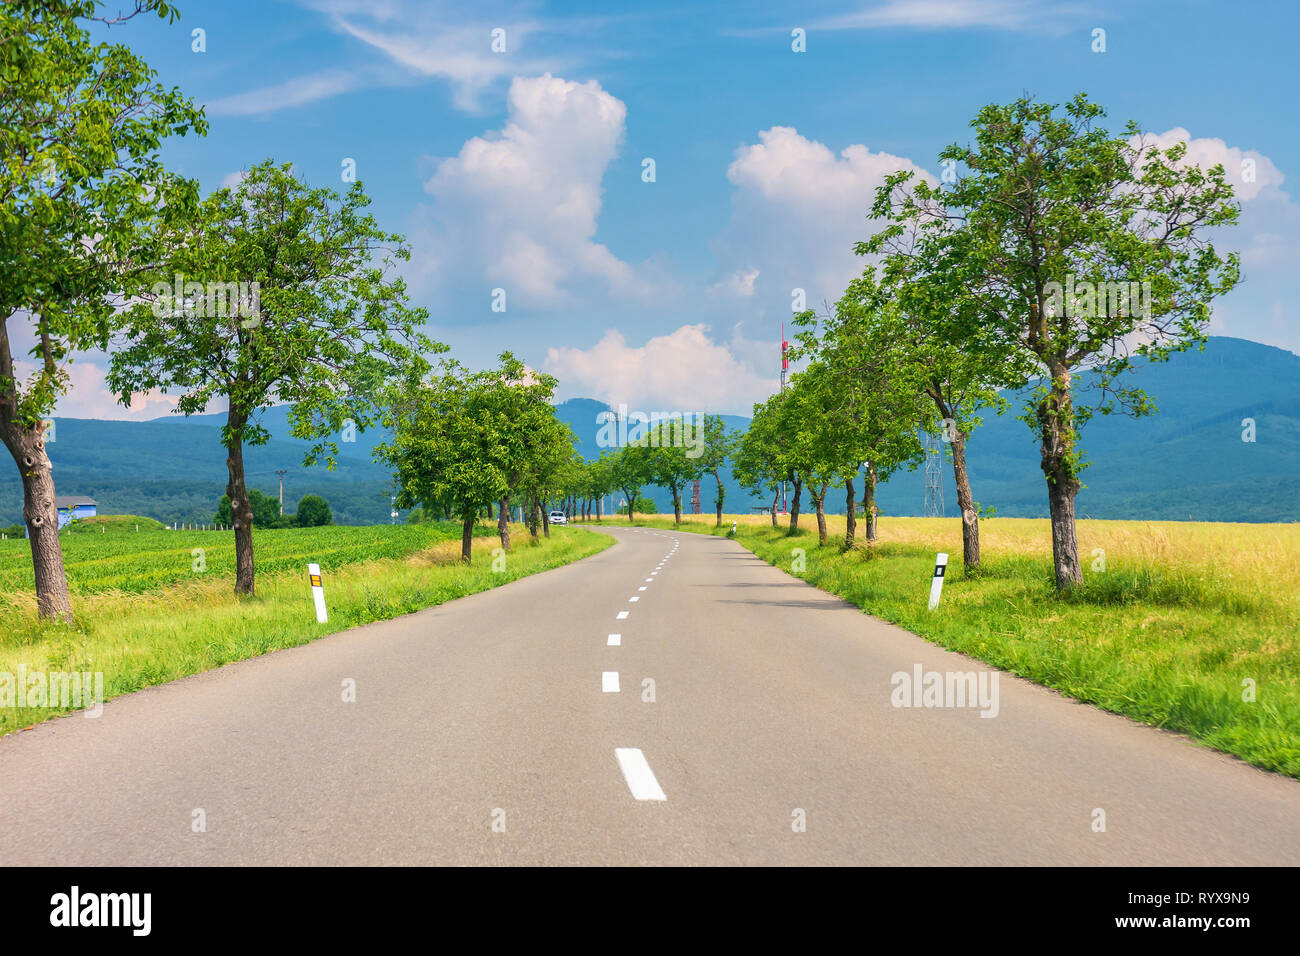 countryside road in to the mountains. trees and rural fields on both sides along the winding way. car ahead in the distance. wonderful sunny weather w Stock Photo